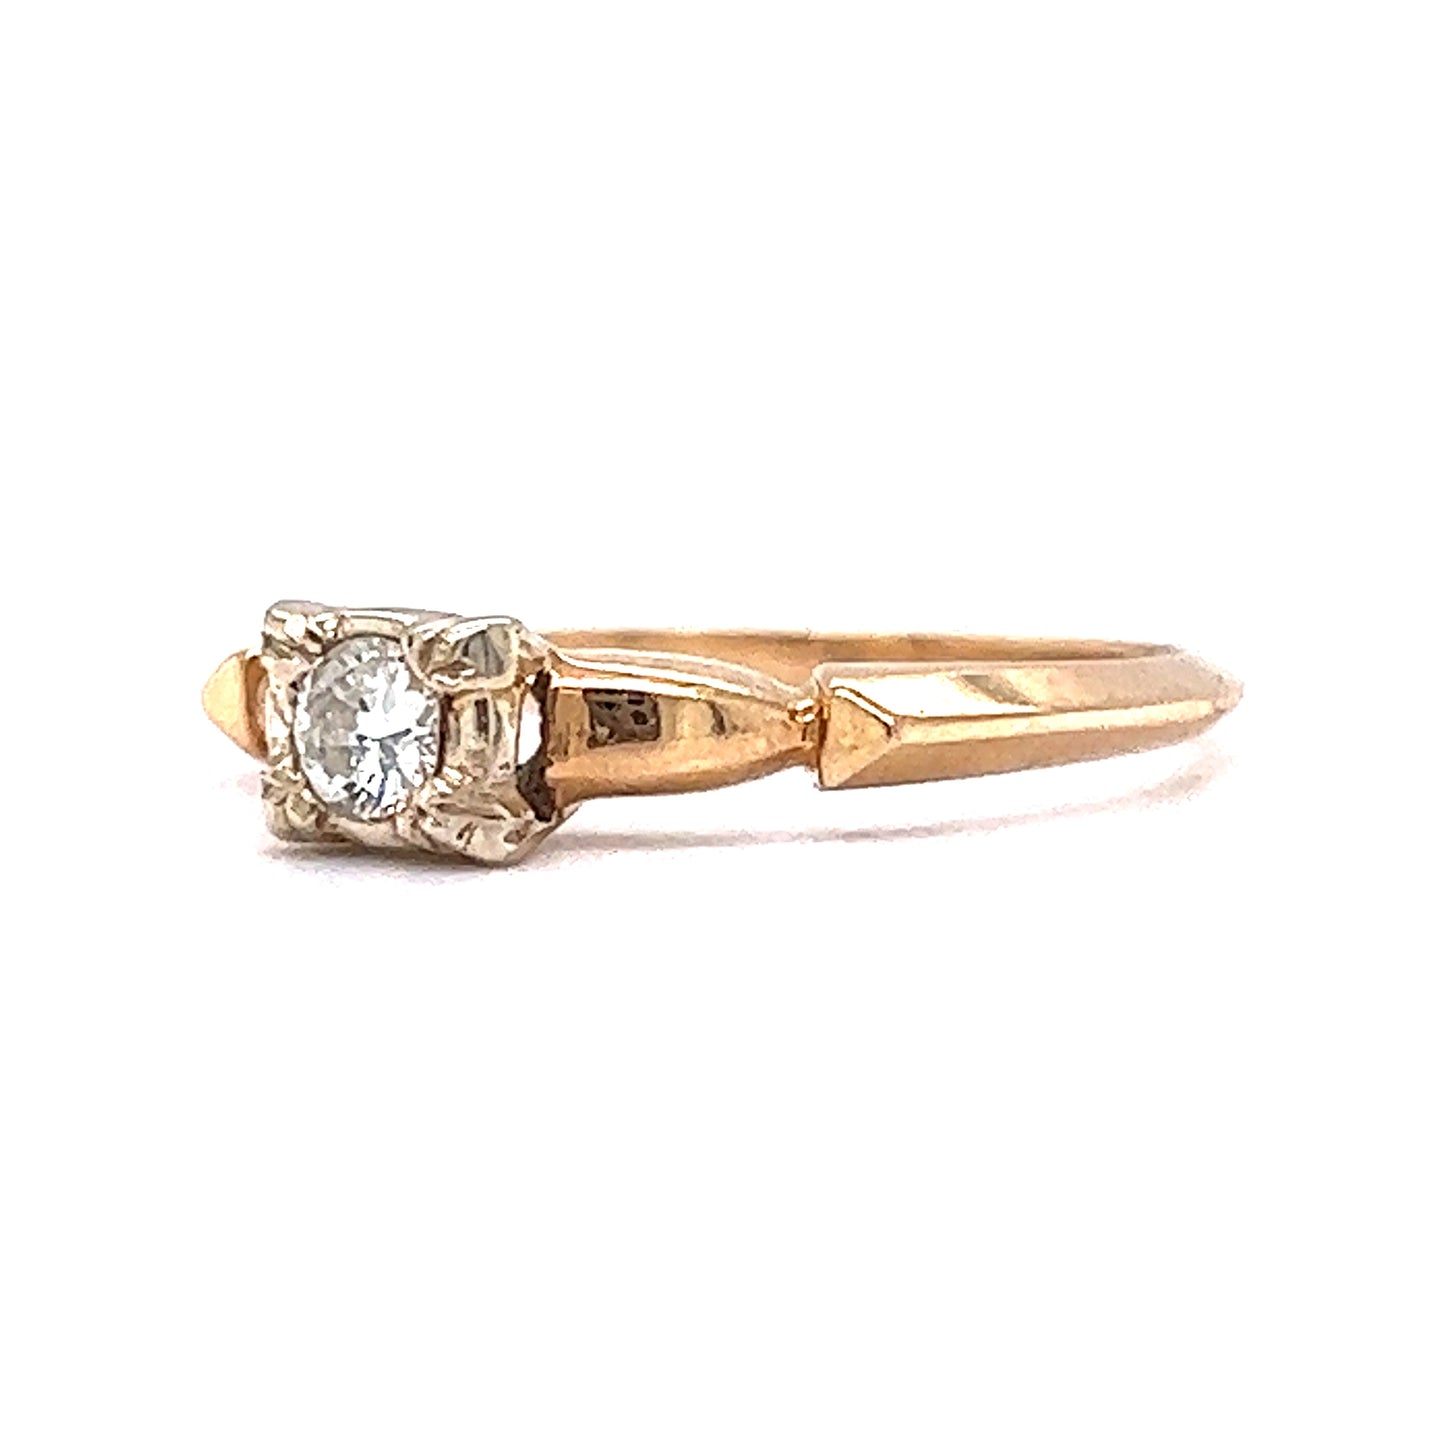 .15 Retro Two-Tone Diamond Engagement Ring in 14k/18k Gold